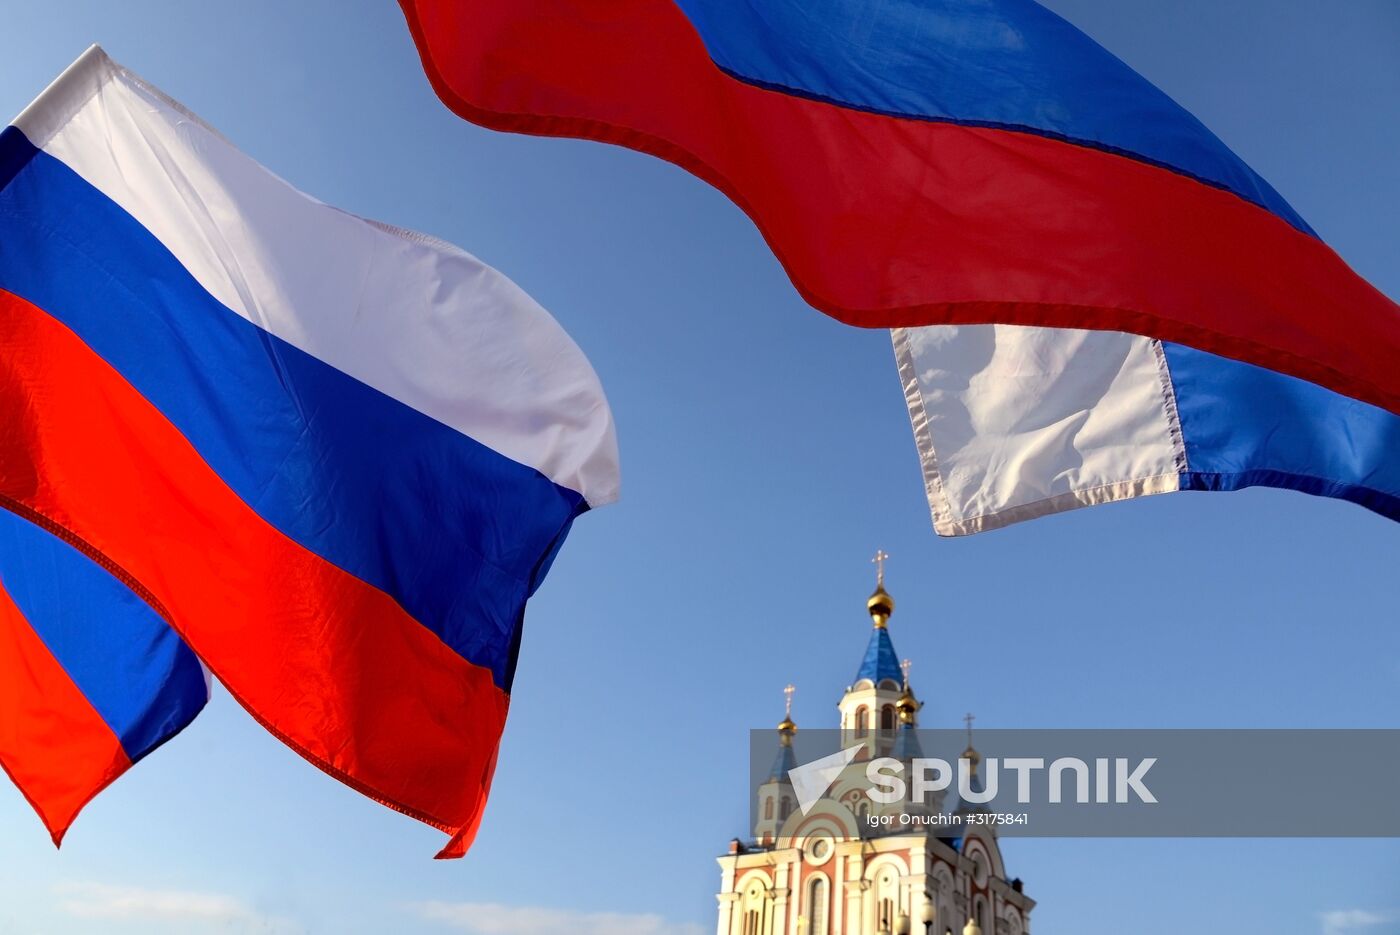 Russian State Flag Day celebrations